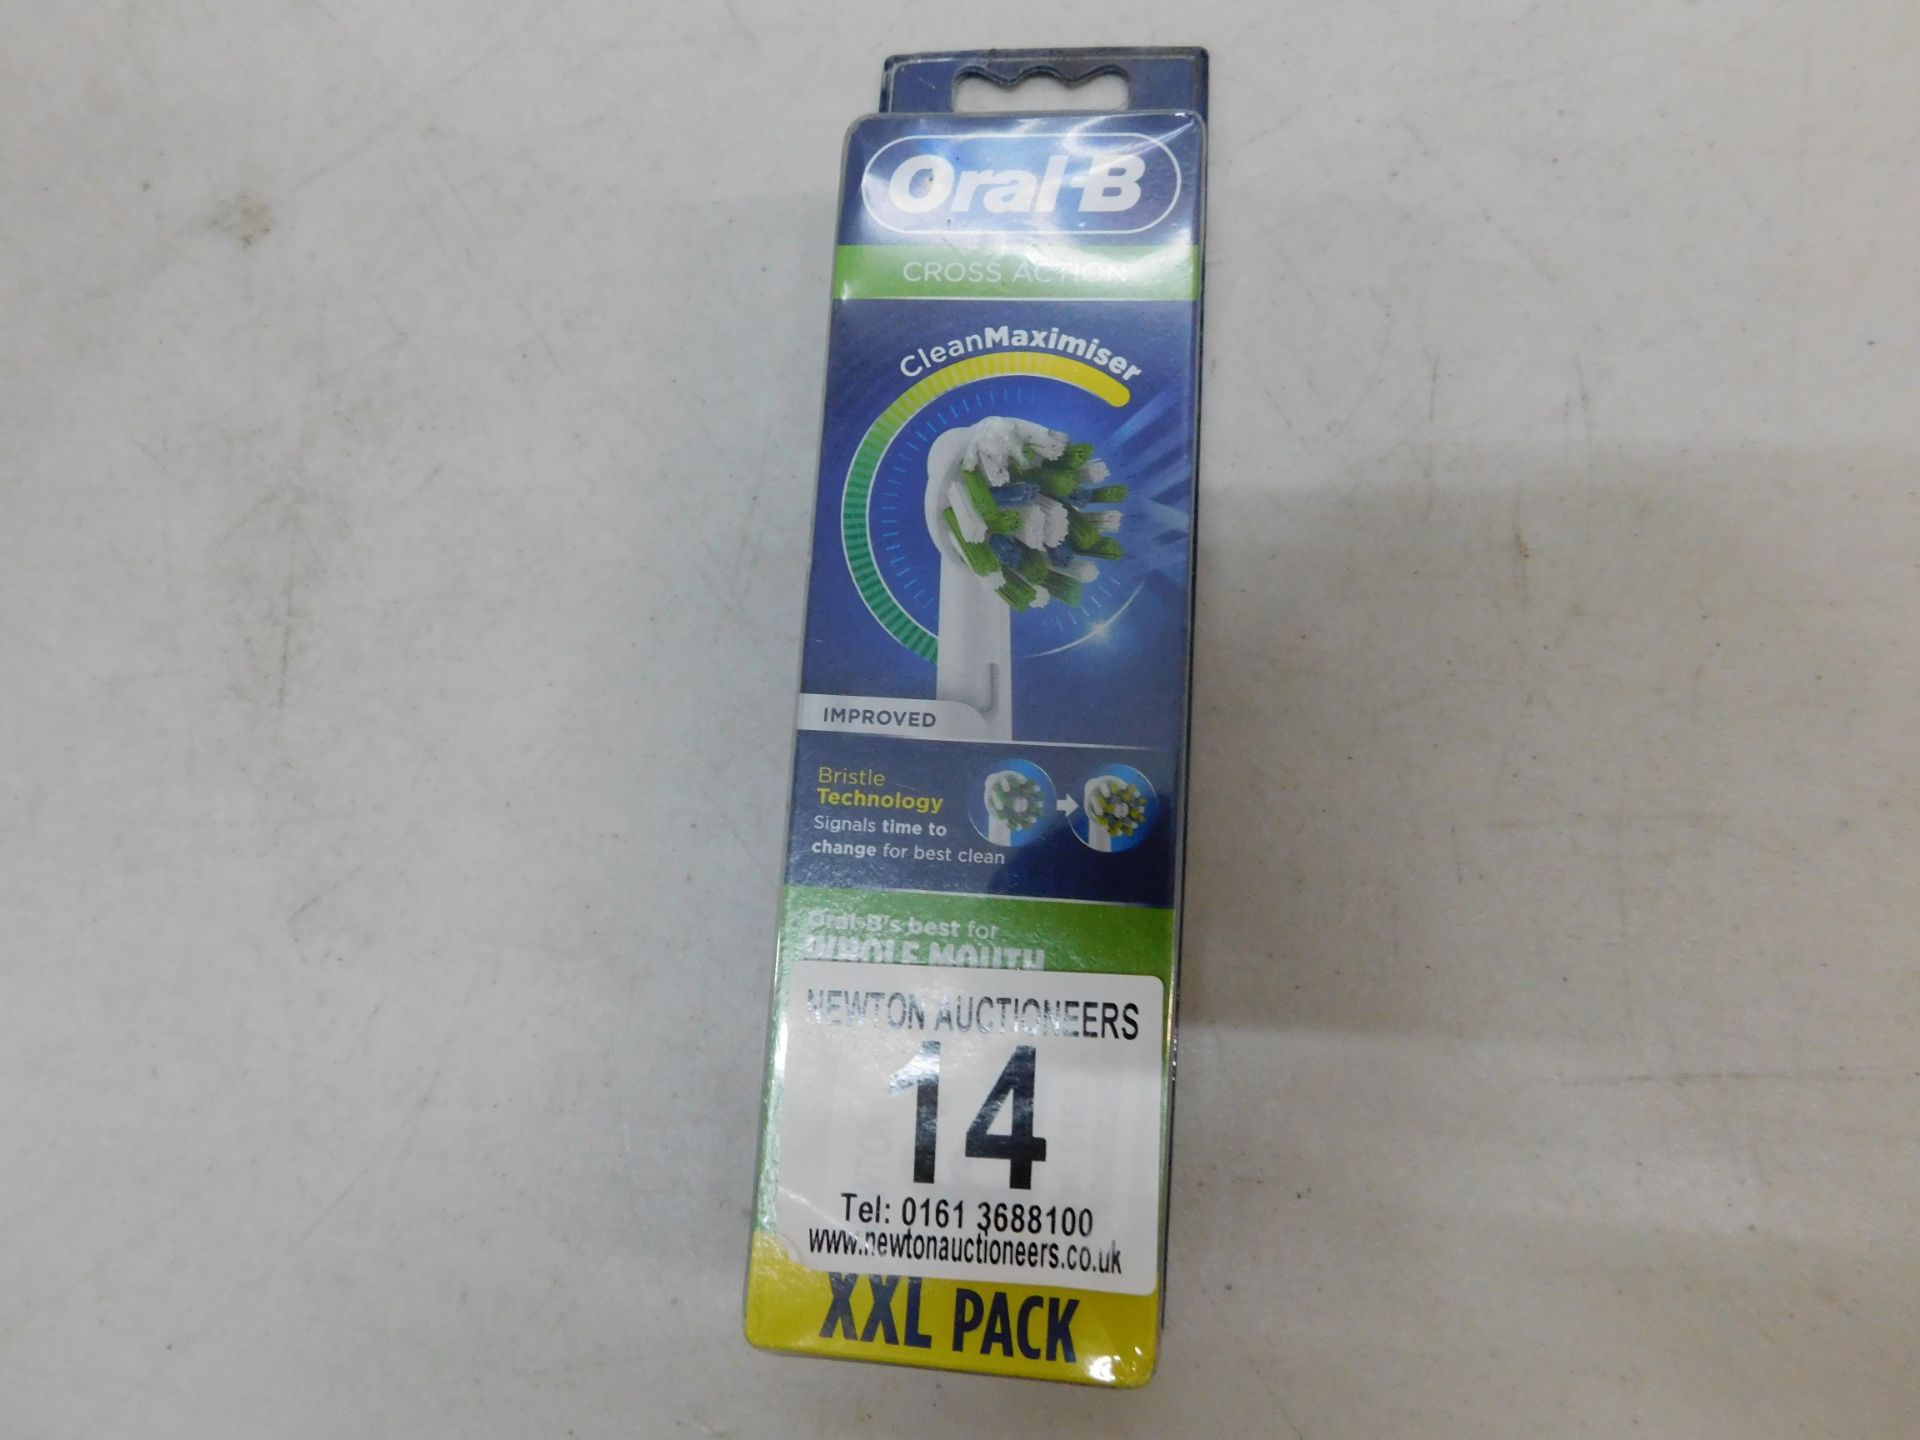 1 BRAND NEW PACK OF ORAL B CROSS ACTION TOOTHBRUSHES RRP Â£24.99